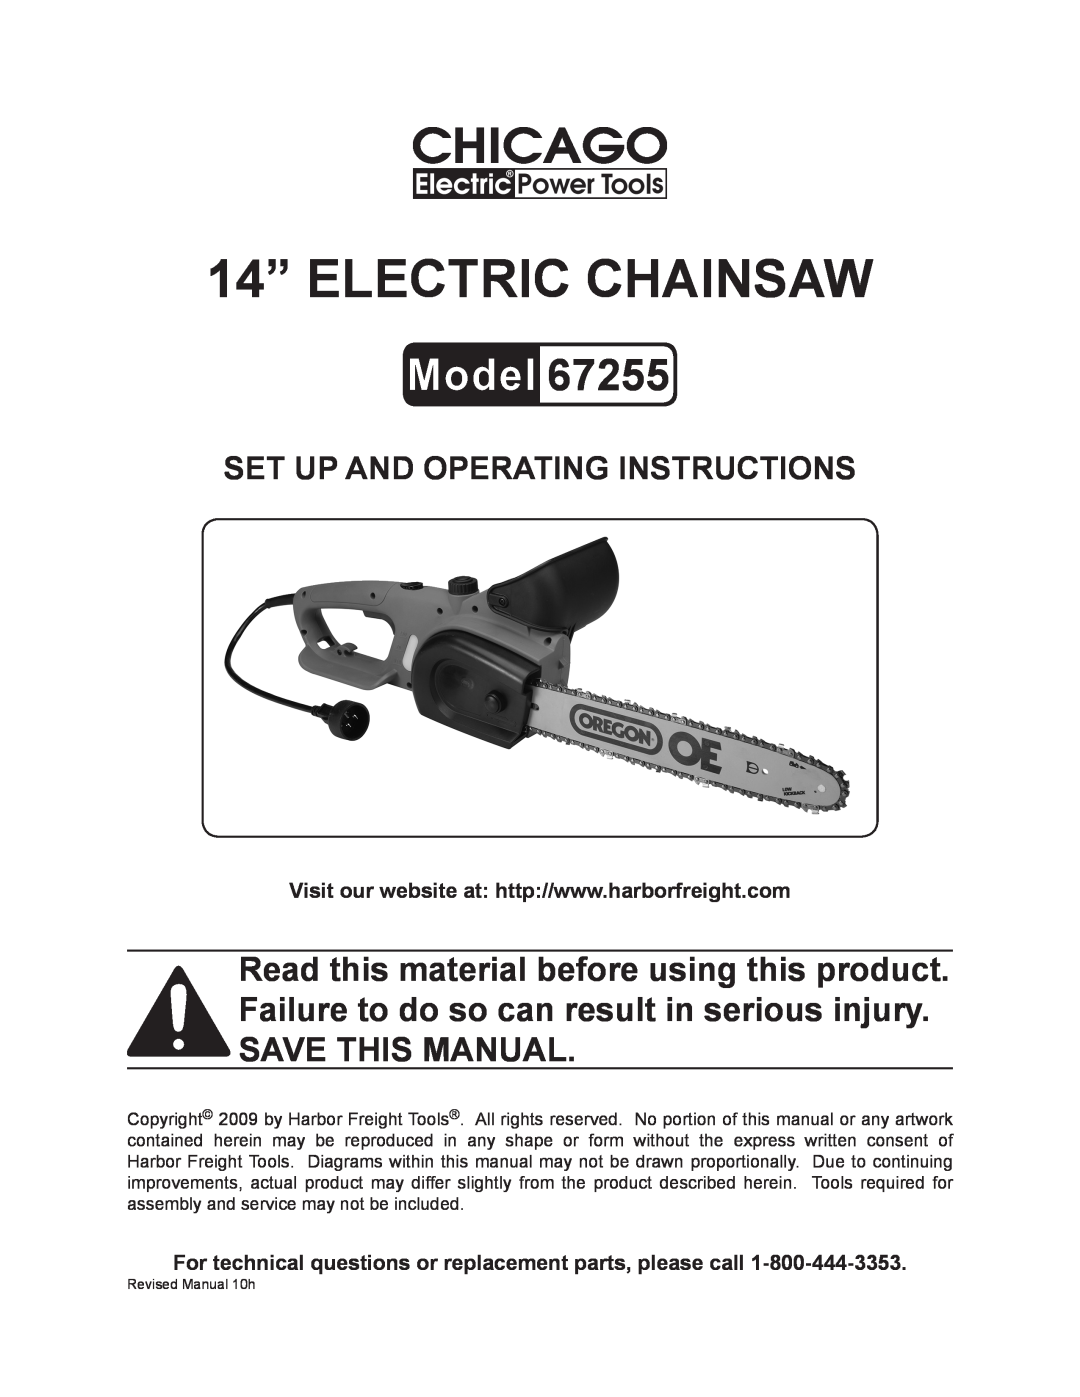 Harbor Freight Tools 67255 operating instructions 14” electric Chainsaw, Set up and Operating Instructions 